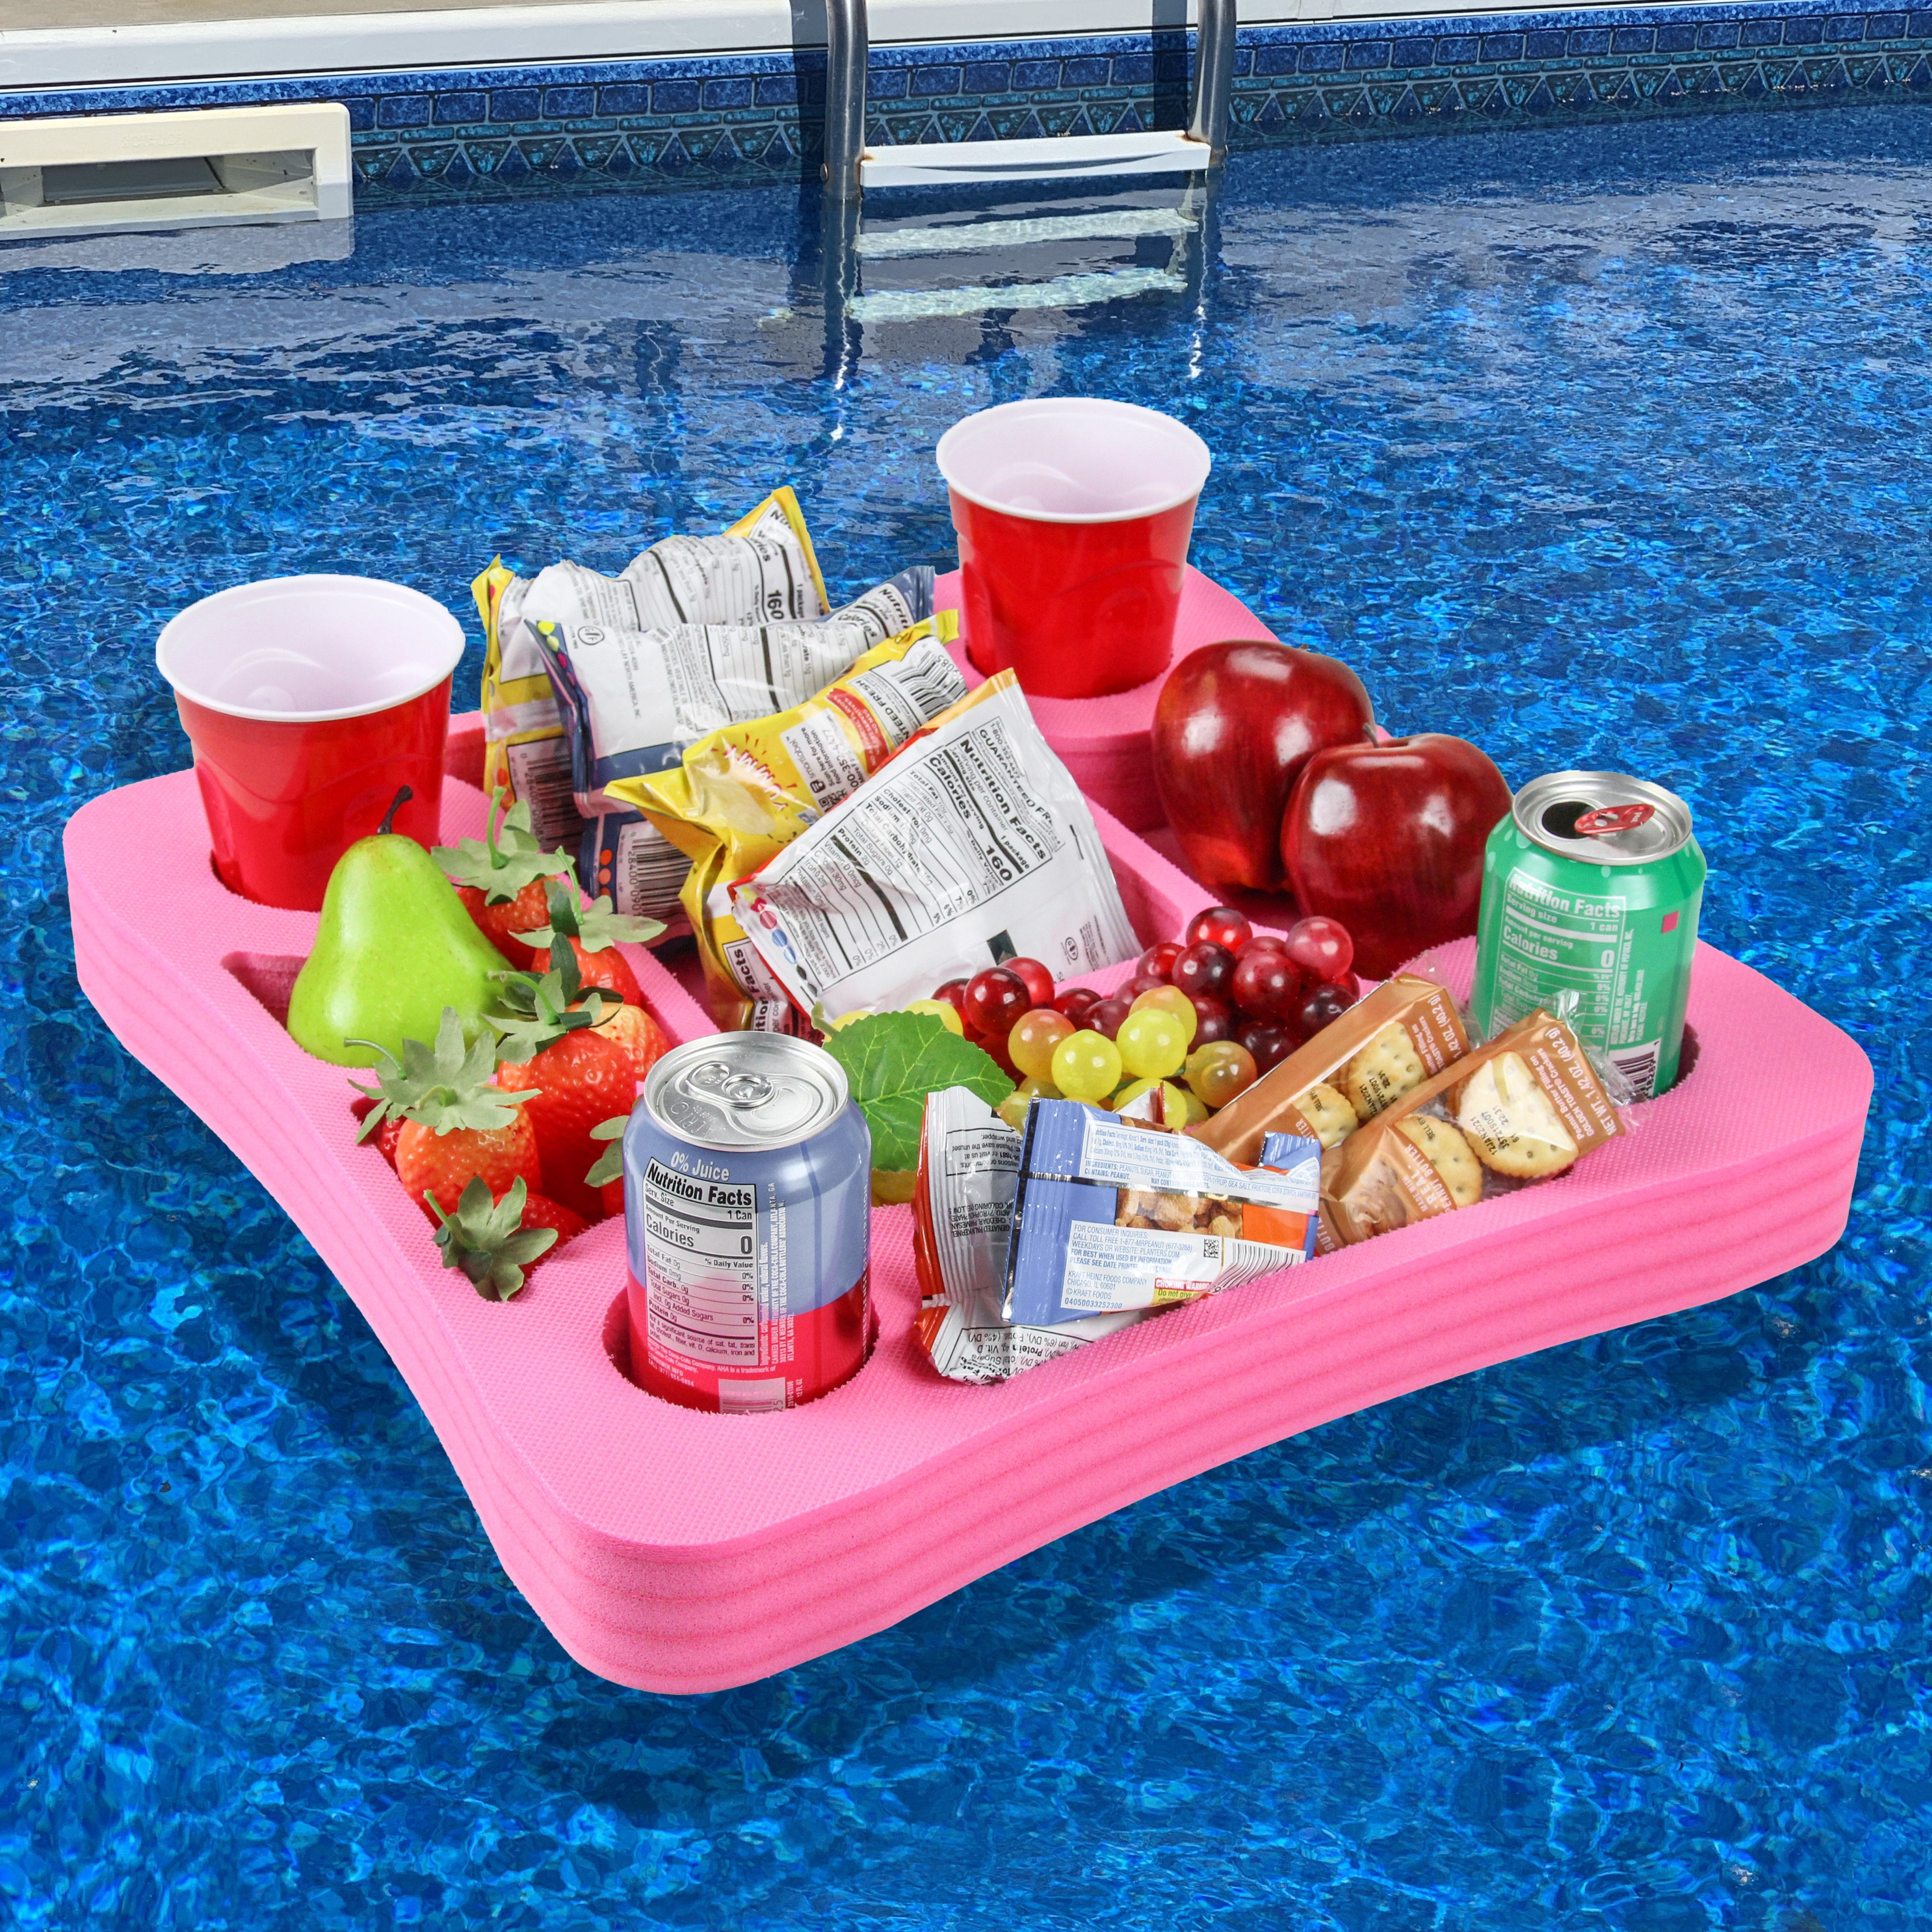 Floating Drink Holder Refreshment Spa Hot Tub Bar Table for Pool or Beach Party Lounge Durable Foam 17.5 Inches Large 10 Compartment UV Resistant